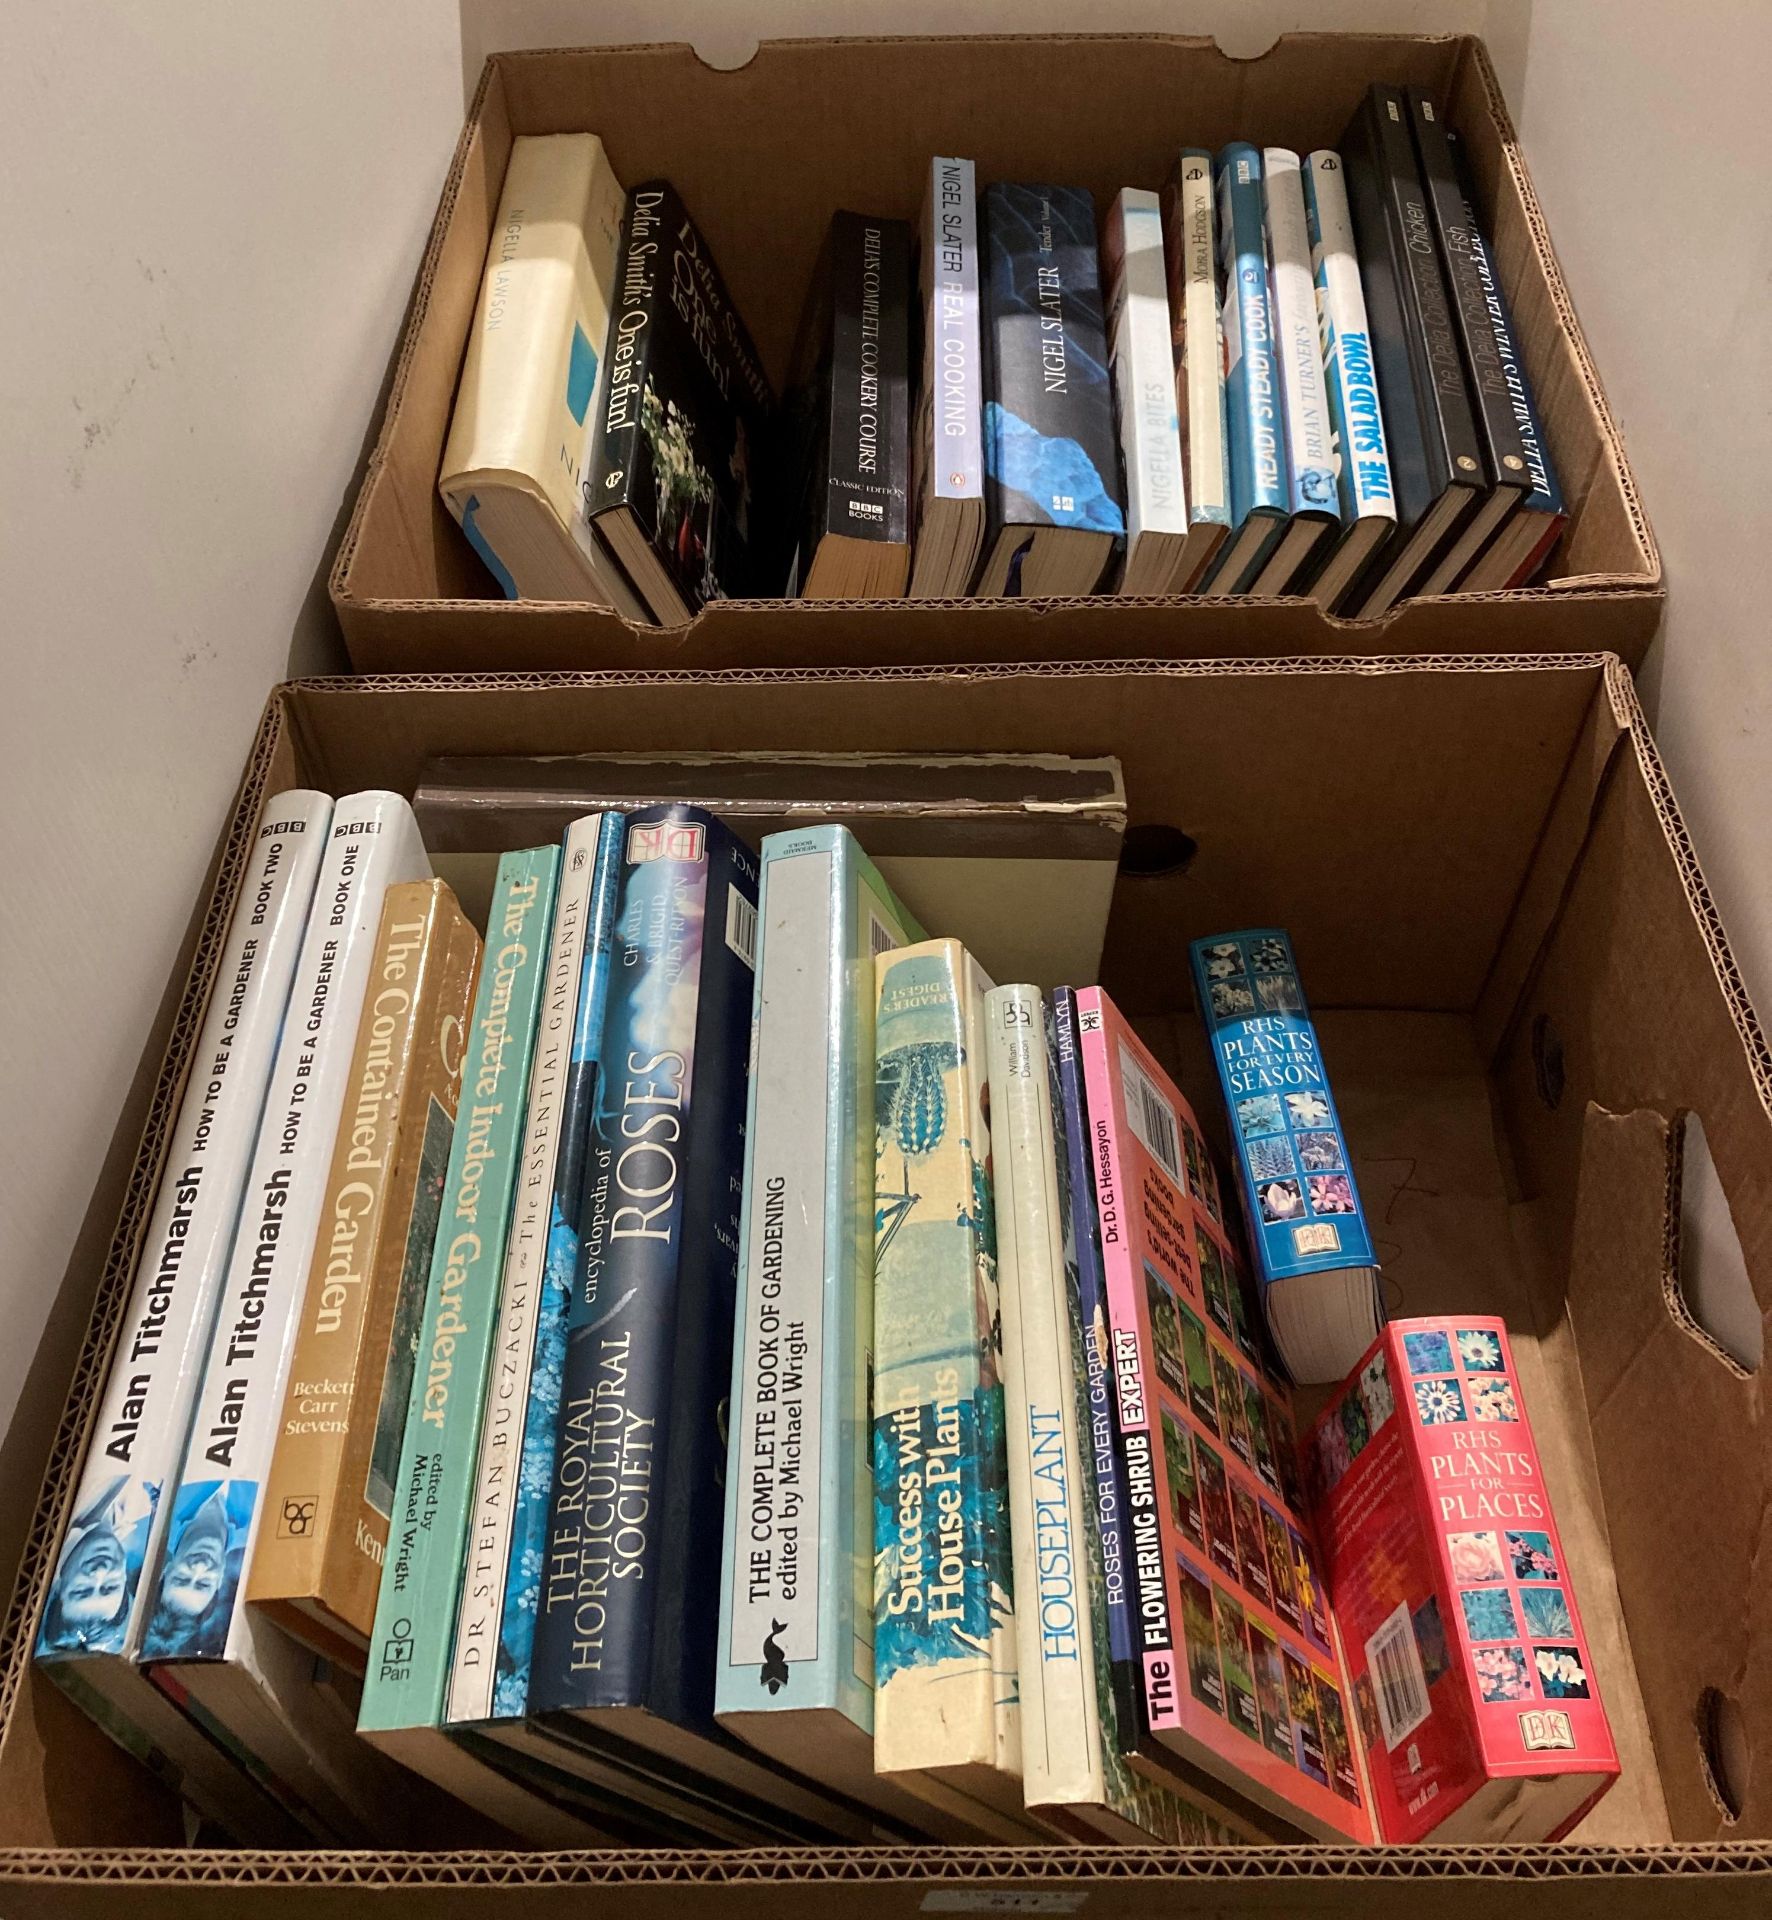 Contents to two boxes - approximately thirty assorted books on cooking and gardening by Alan